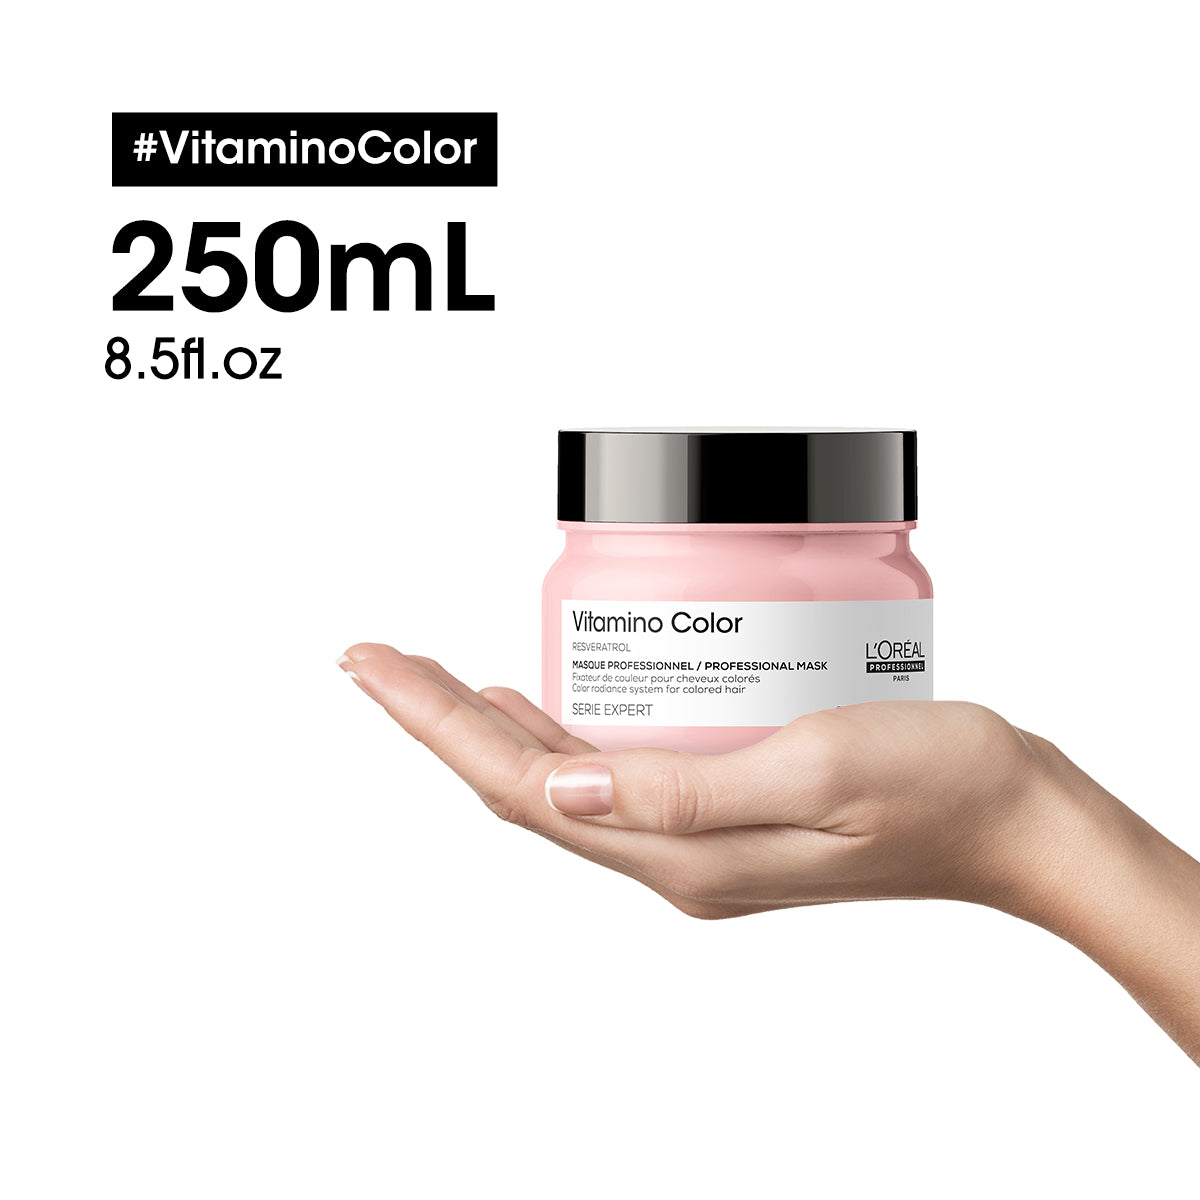 Vitamino Color Mask With Resveratrol For Color-Treated Hair Serie Expert 250Ml